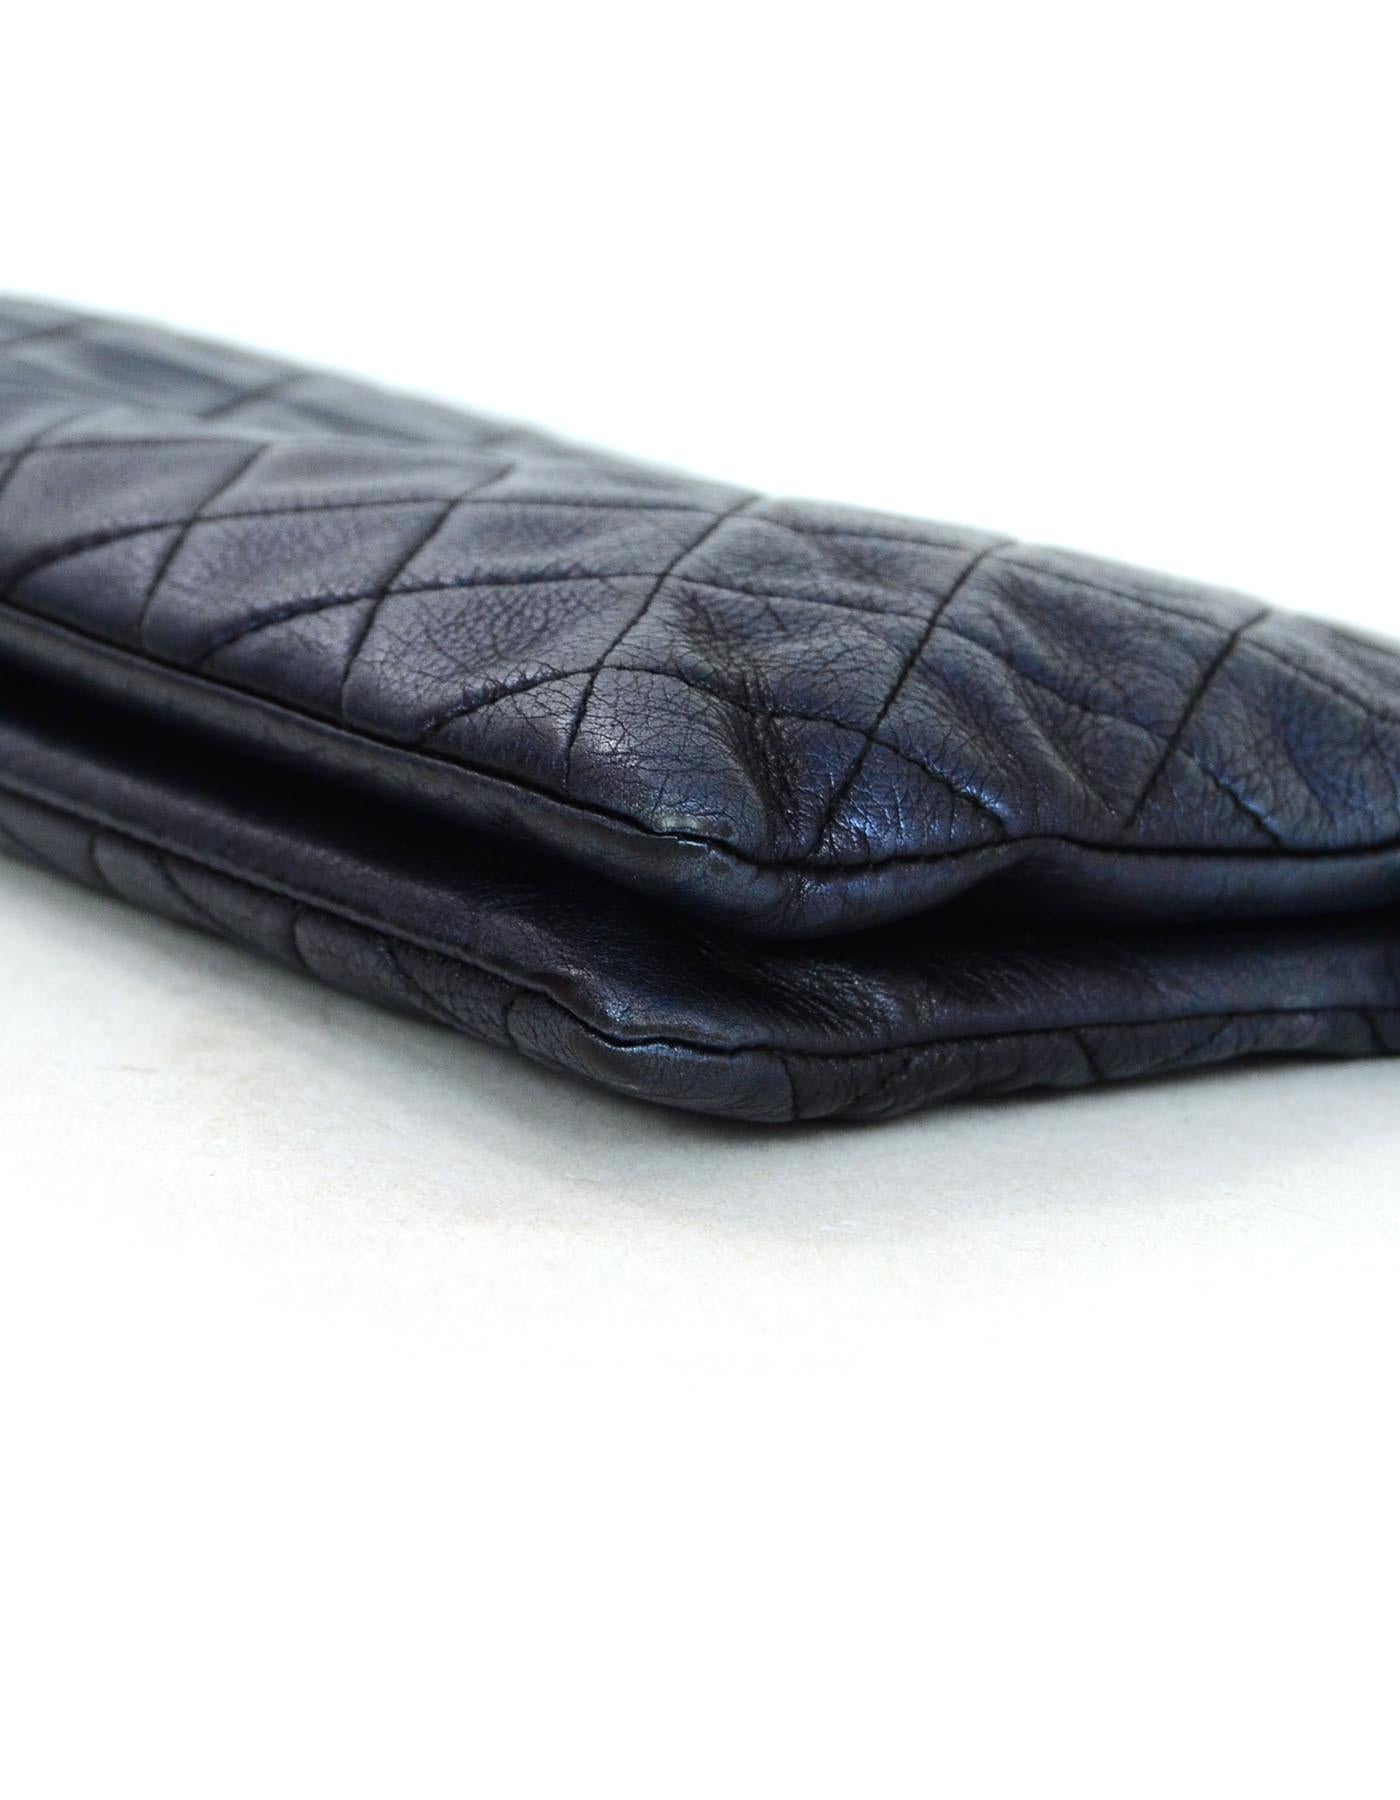 Chanel Metallic Blue Quilted Boy Clutch Bag with Box, Dust Bag & Auth Card In Good Condition In New York, NY